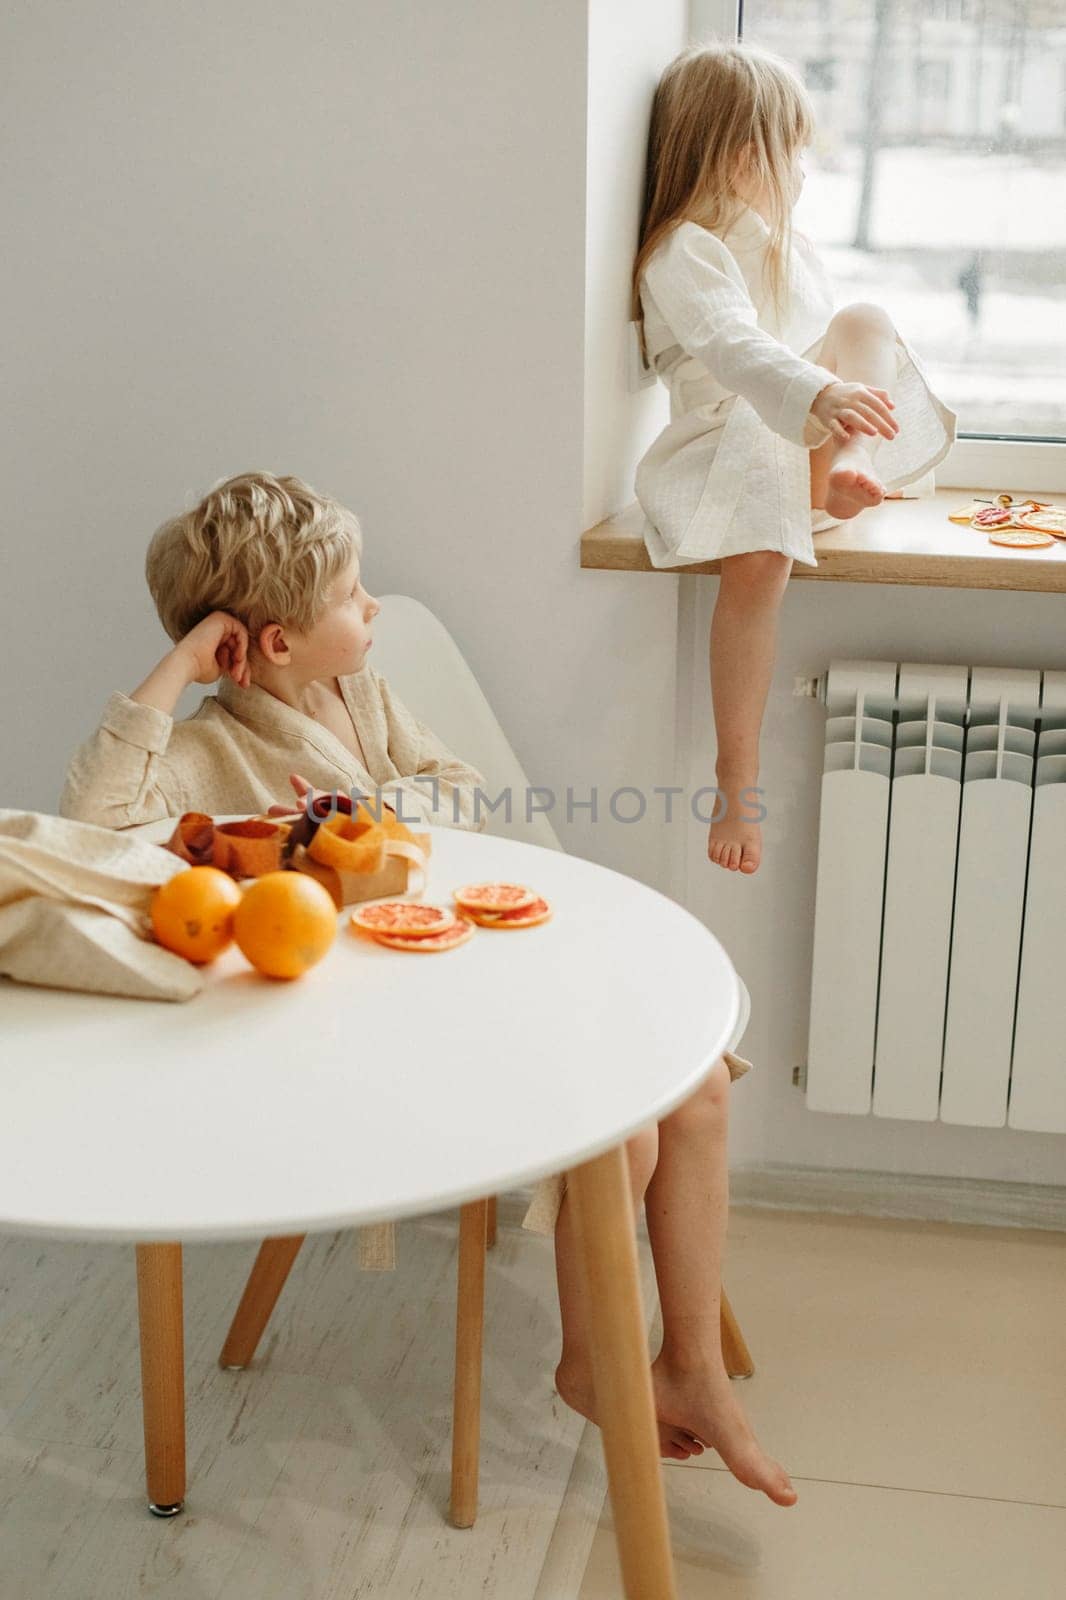 A boy and a girl in bathrobes are eating candied fruit and marmalade in the kitchen. by Sd28DimoN_1976